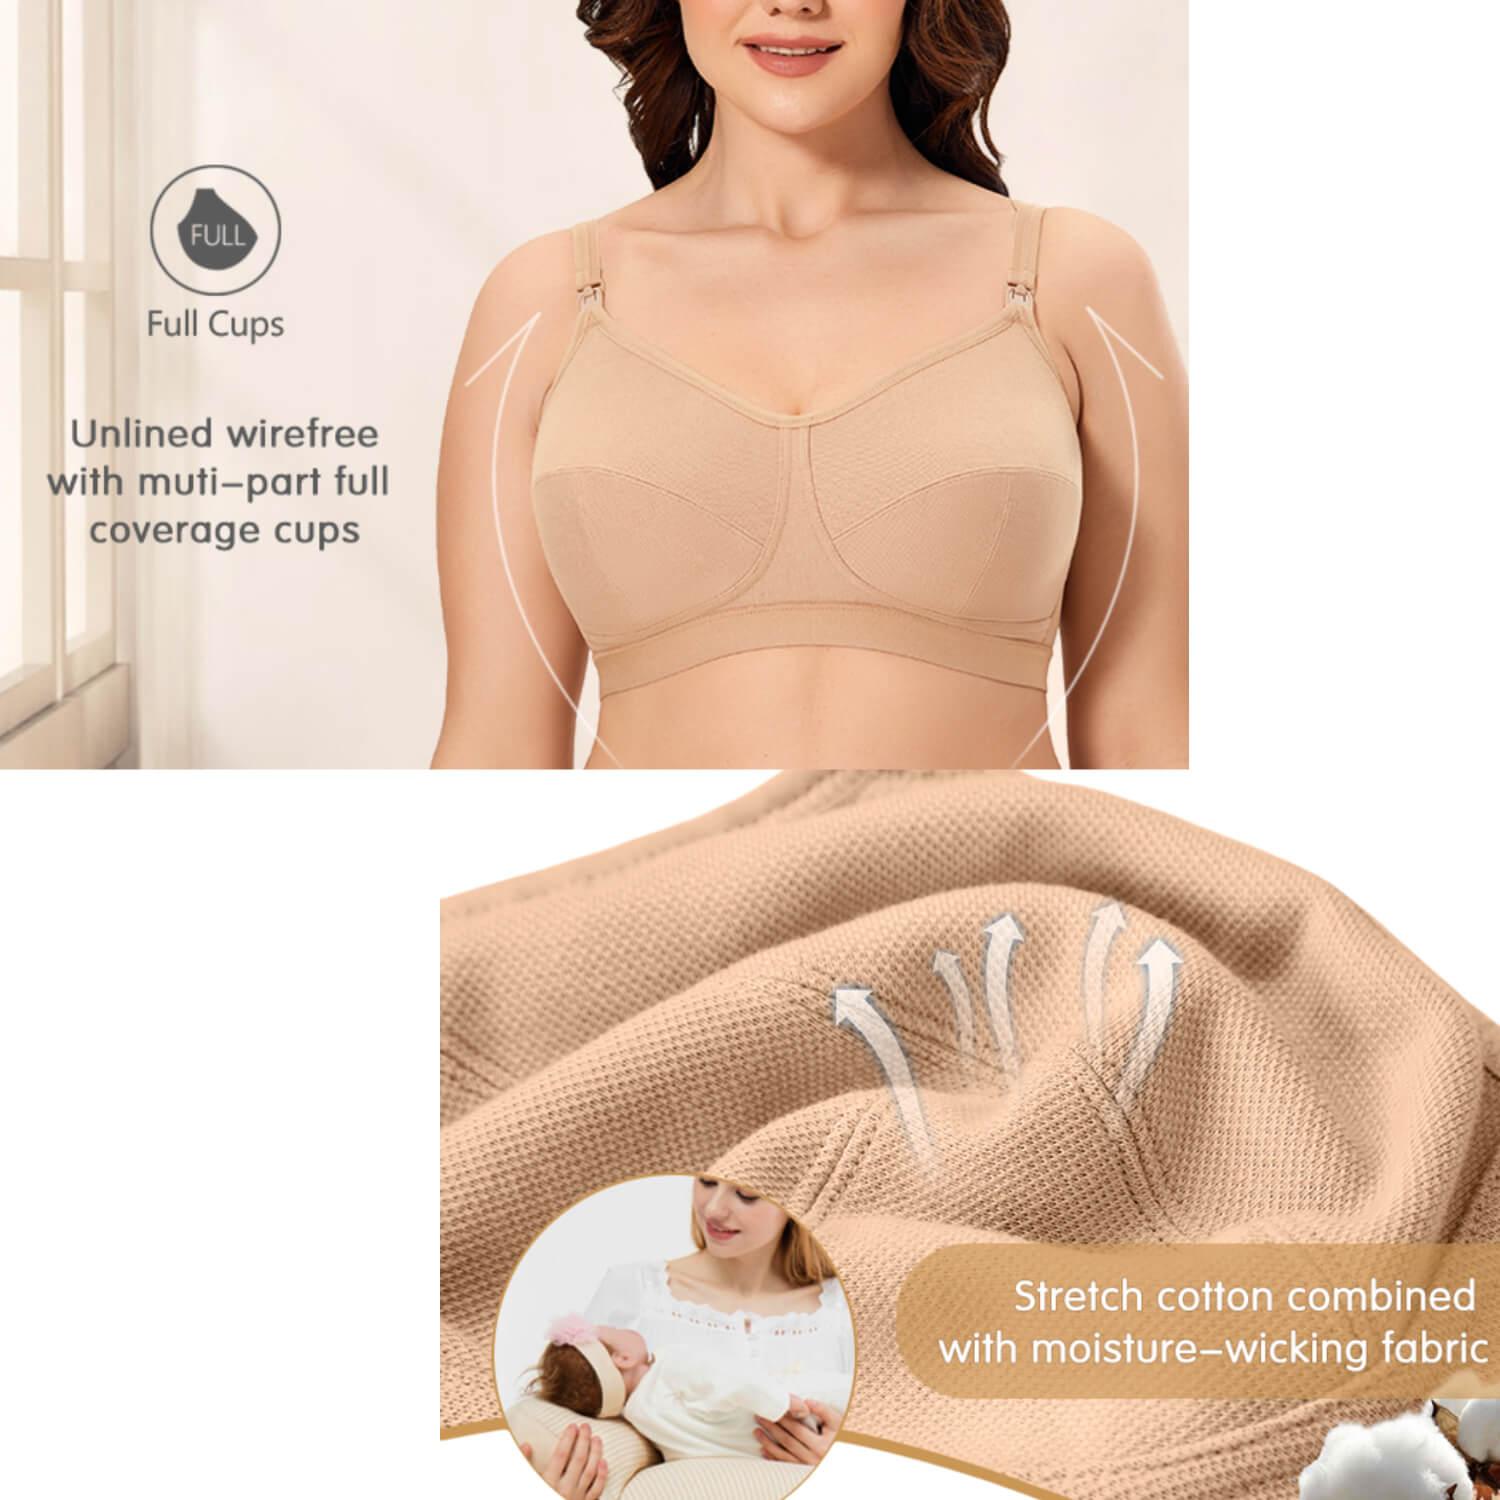 Bras for Big Busts - Buy Full Coverage Cotton Bra In E Cup Size